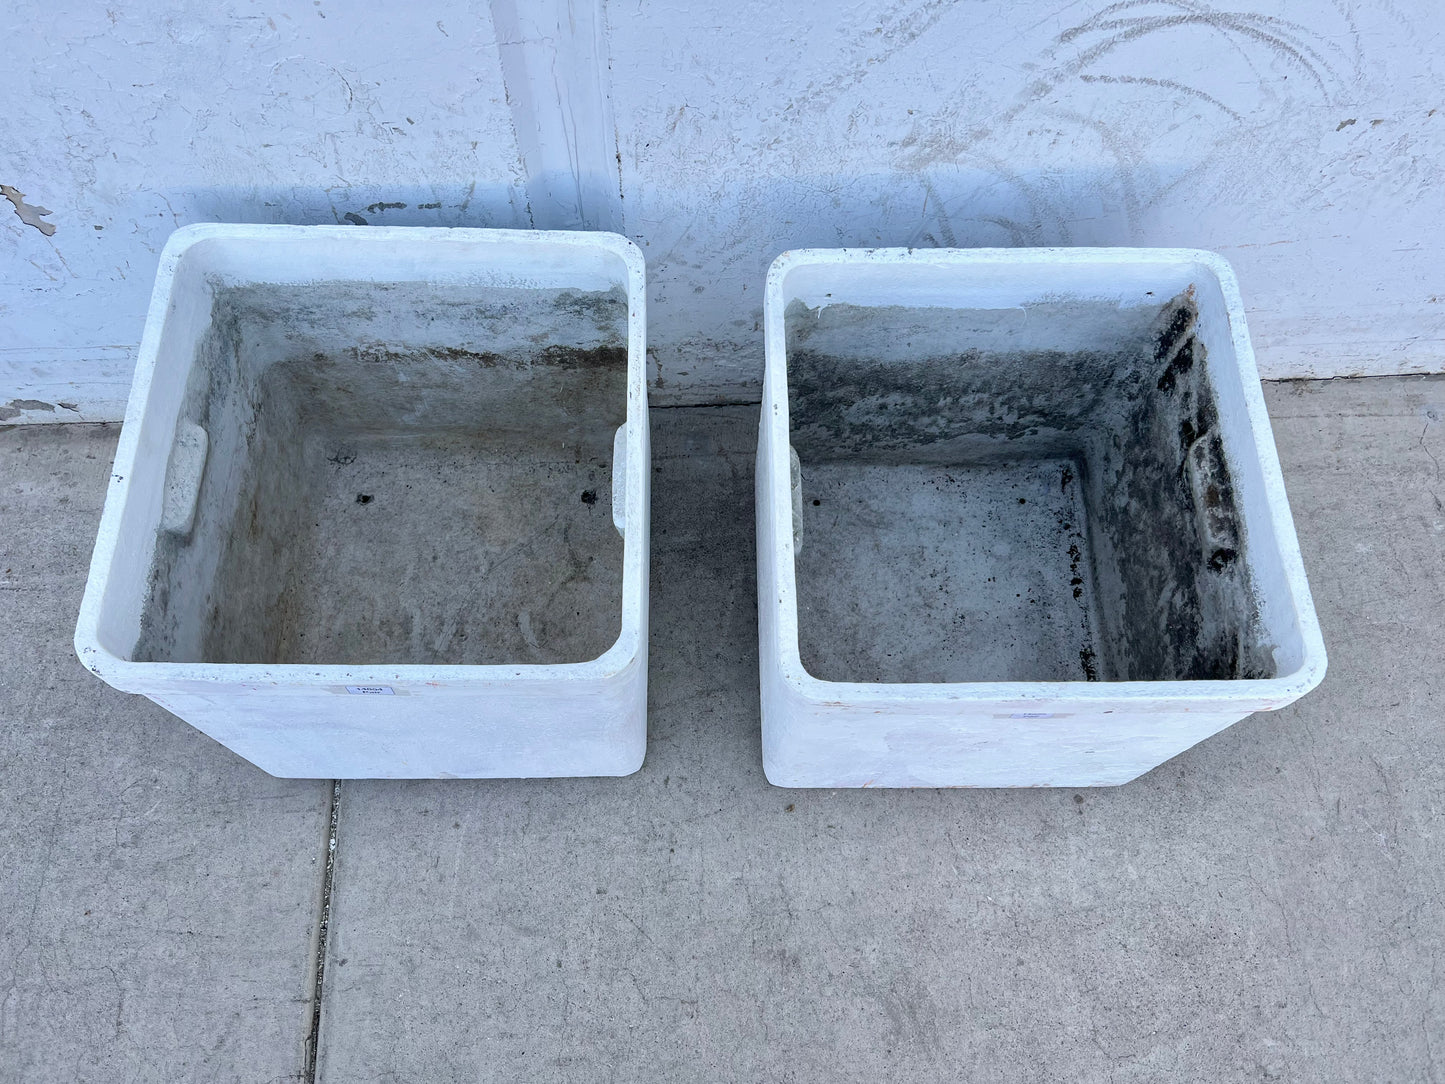 Pair of Square Willy Guhl Planters